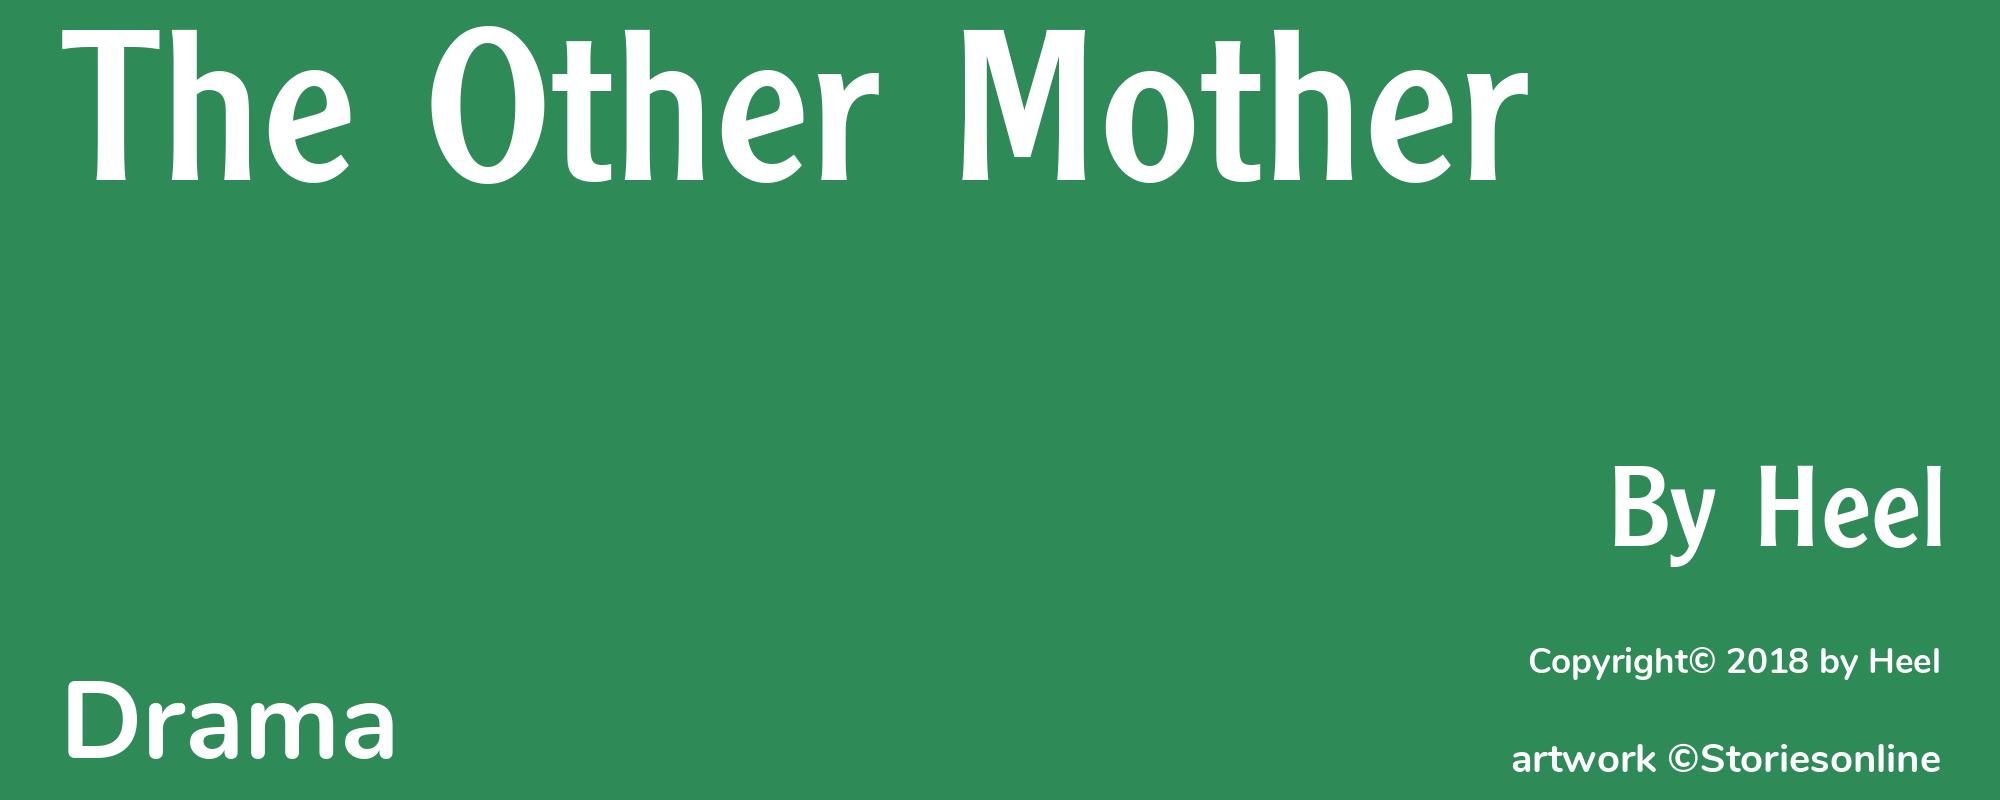 The Other Mother - Cover